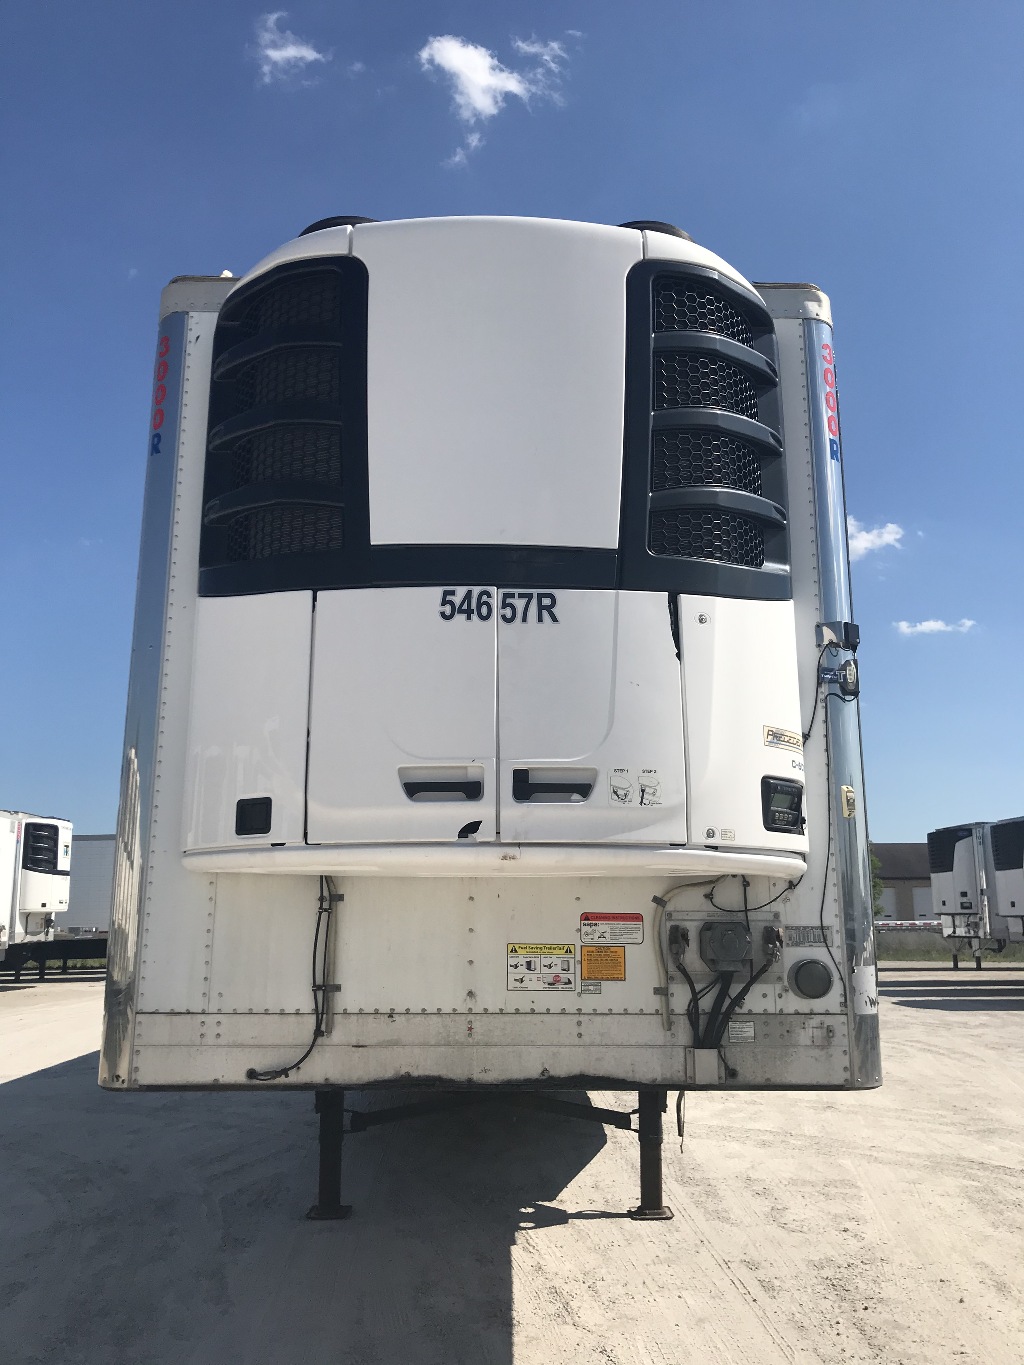 USED 2017 UTILITY 3000R REEFER TRAILER #301795